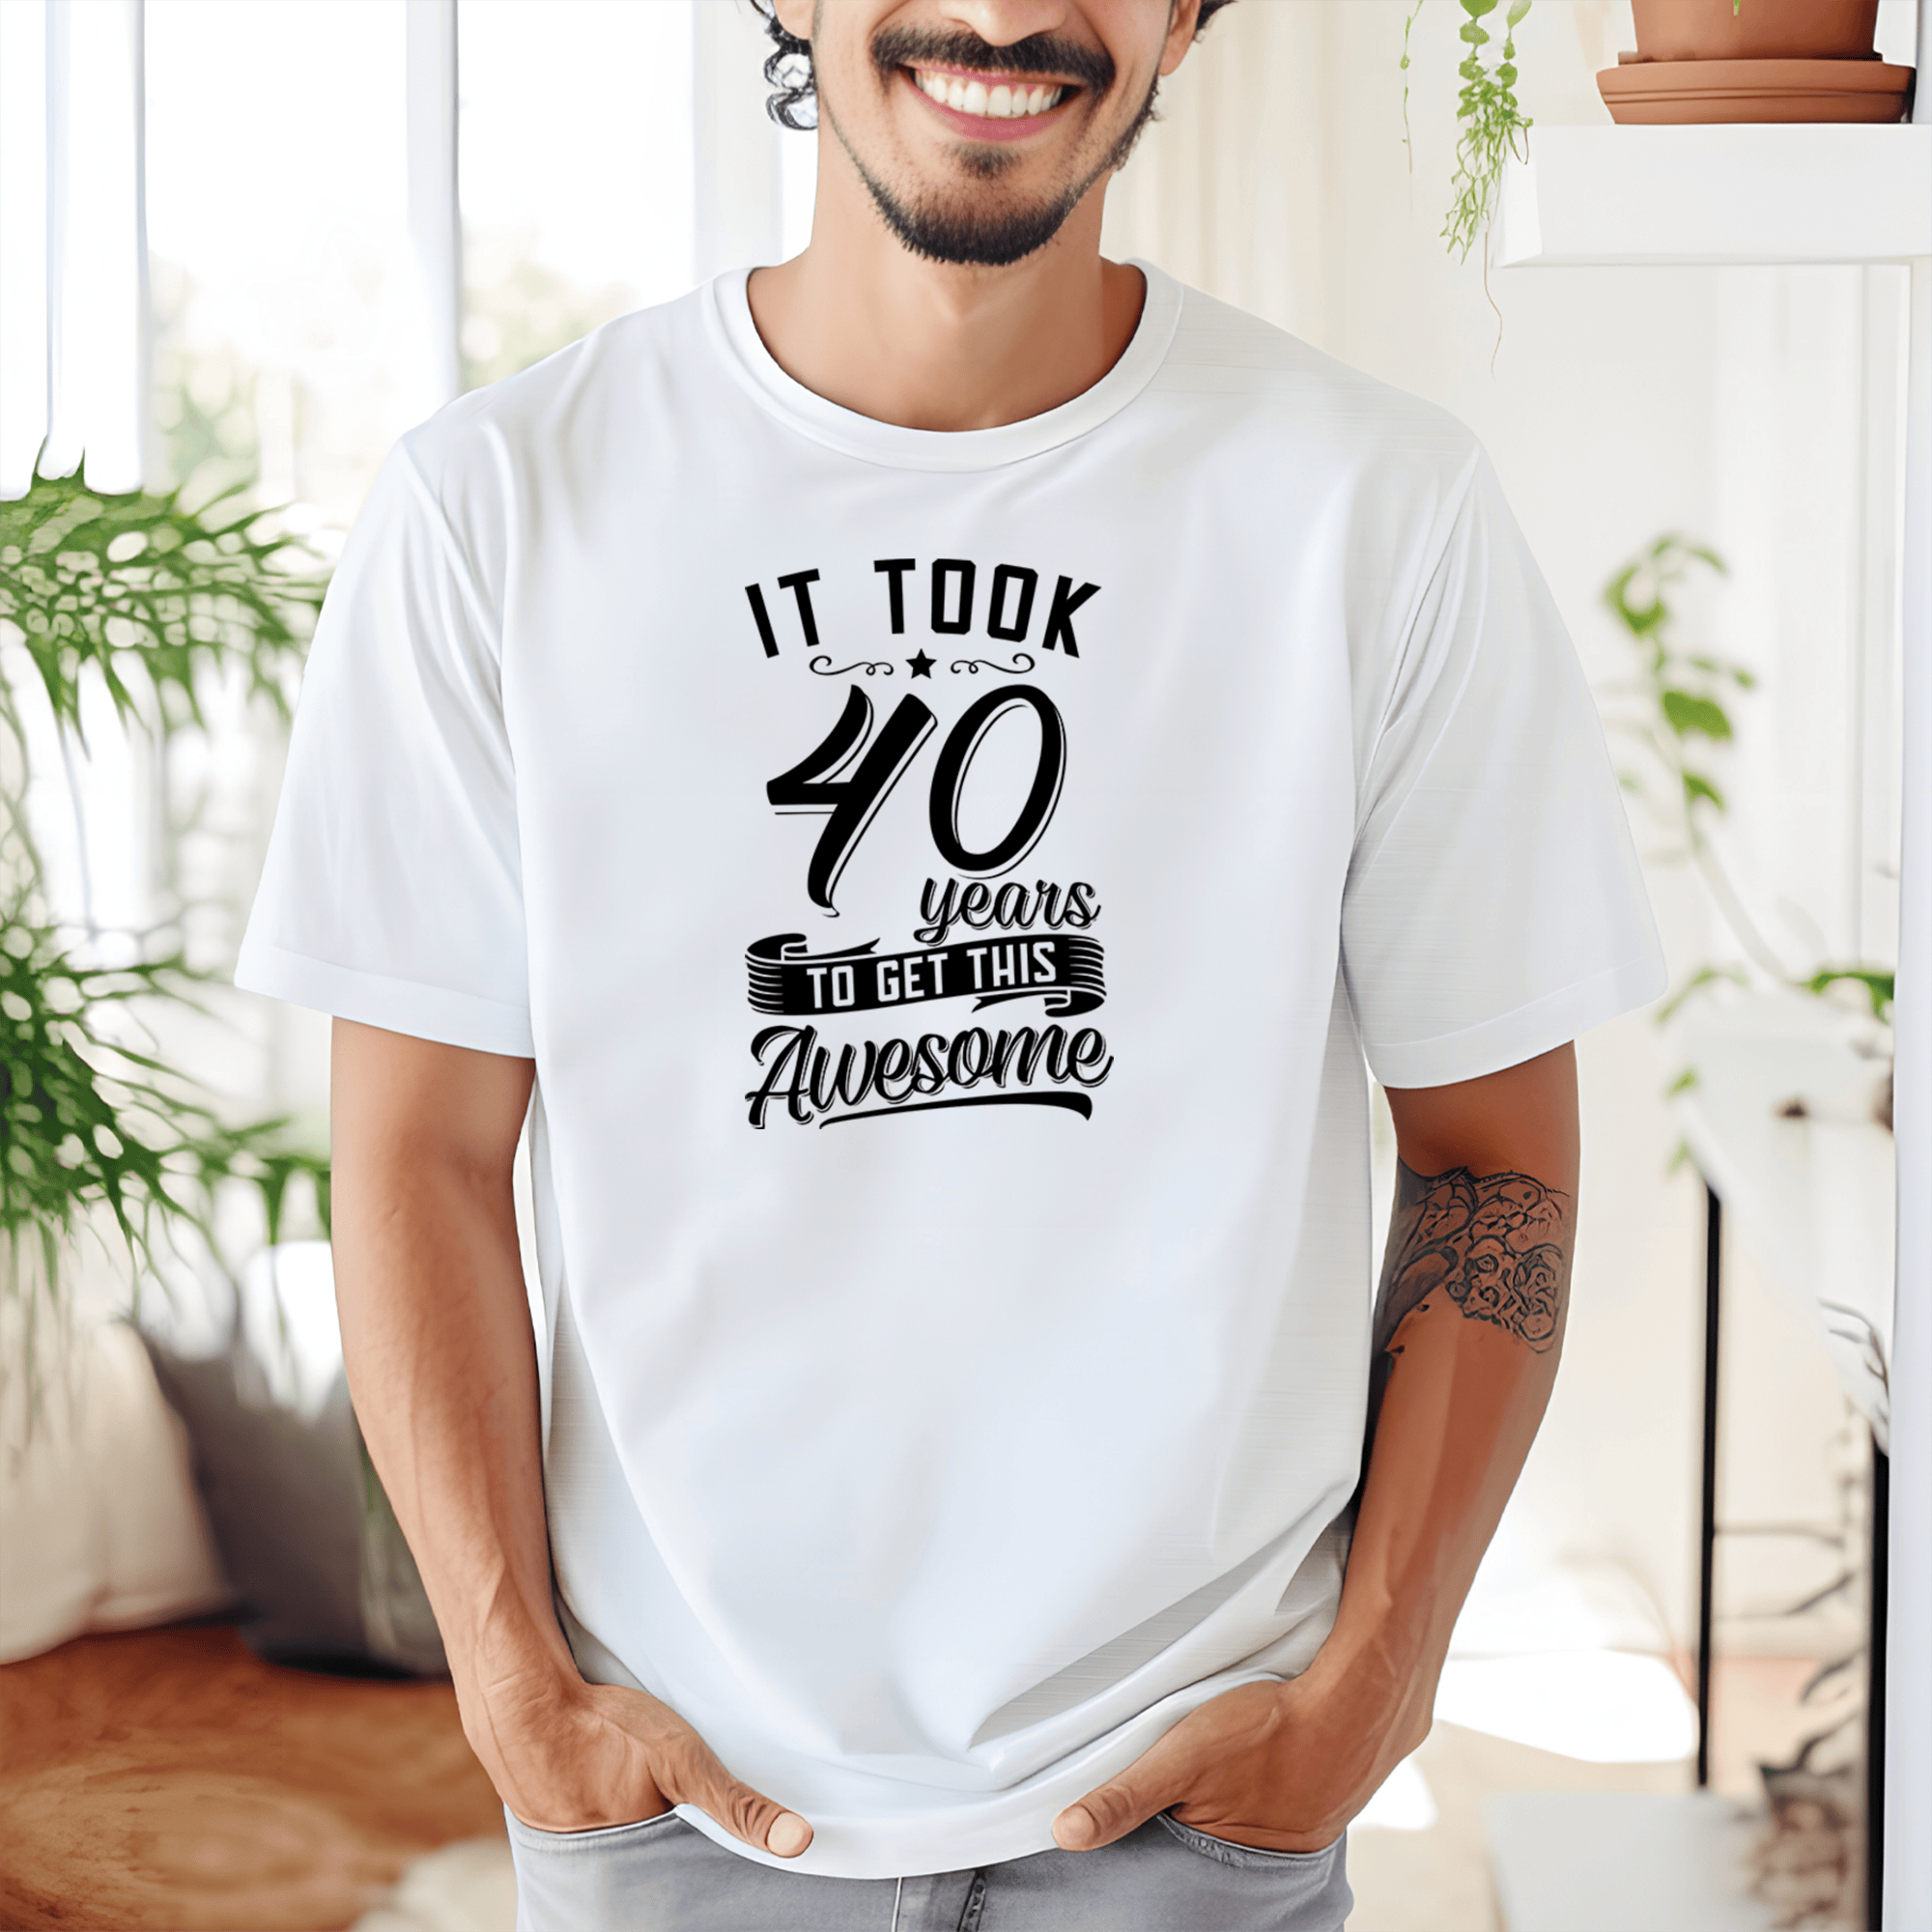 Mens White T Shirt with 40-Years-For-Awesome design